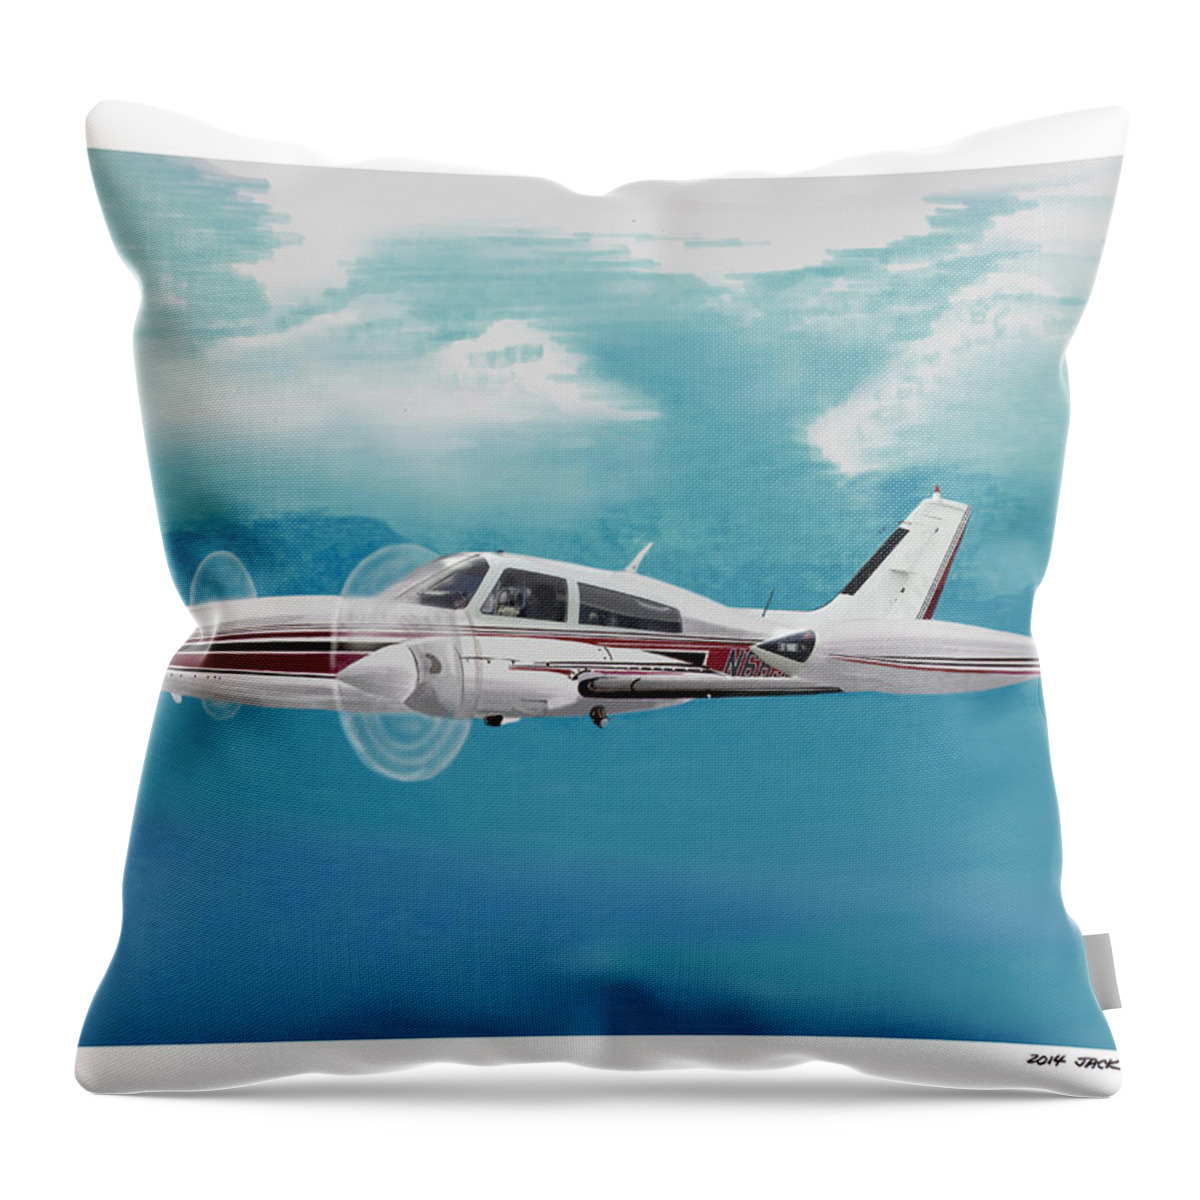 A Watercolor Painting Of The Cessna 310 Turbo-stream With Standard Engines By Lycoming Tio-540 350 Hp Engines Throw Pillow featuring the painting Cessna 310 Twin engine by Jack Pumphrey